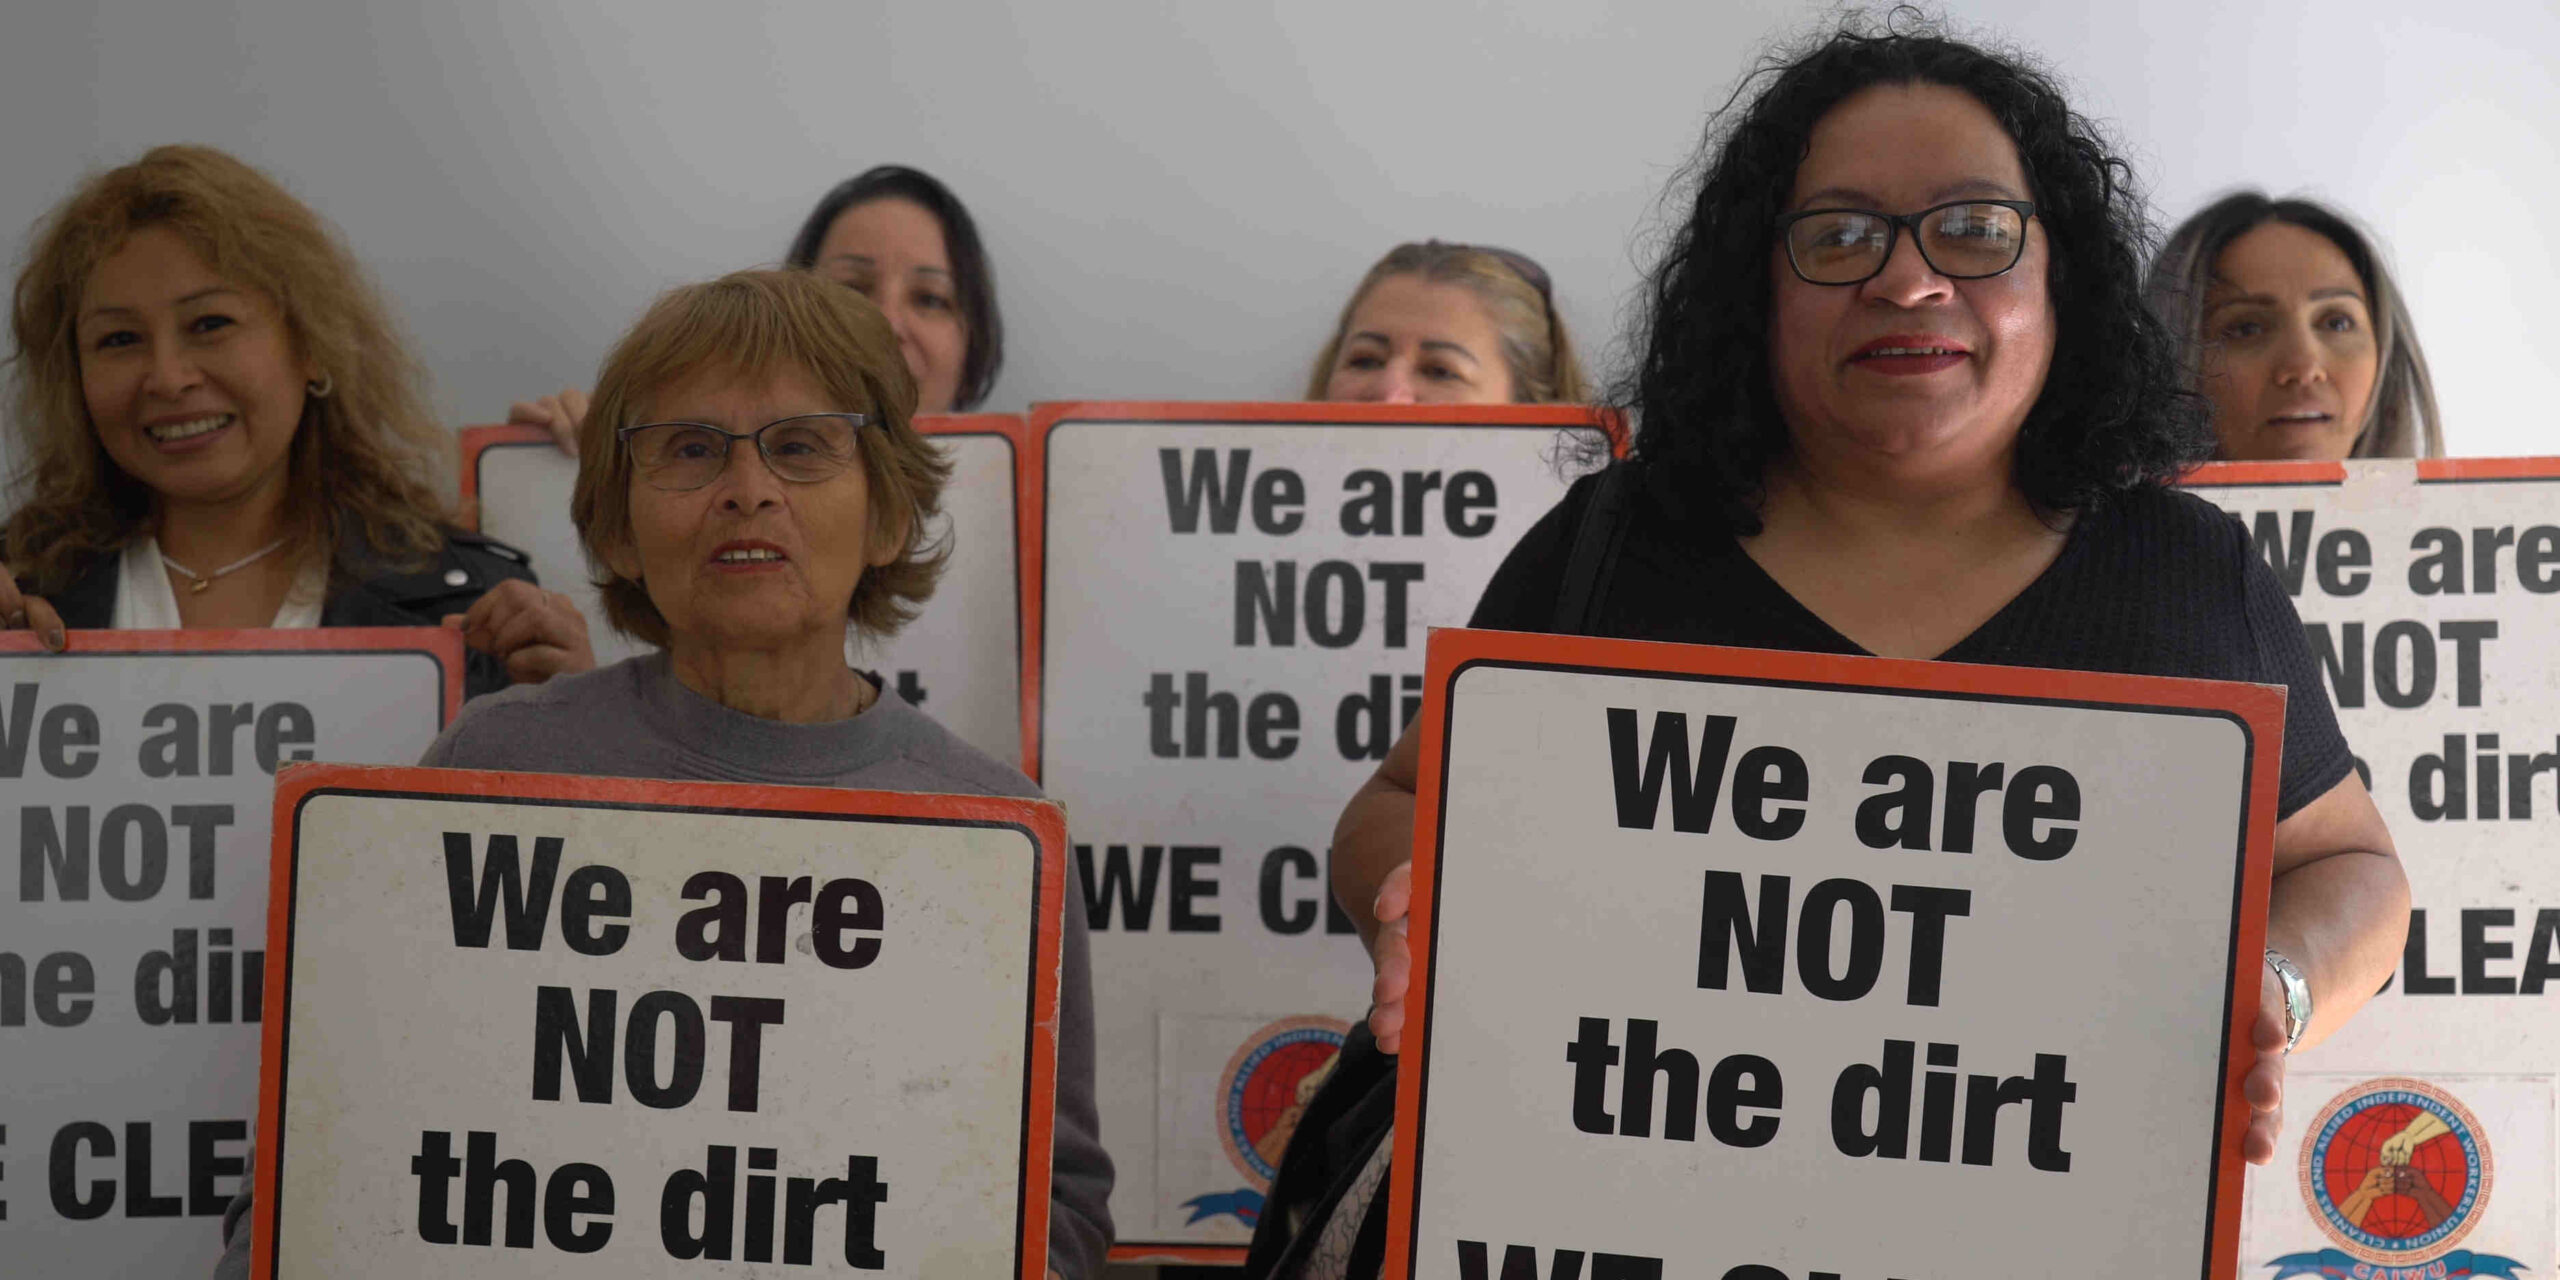 Six women stand together holding signs that say 'We are NOT the dirt we clean'.